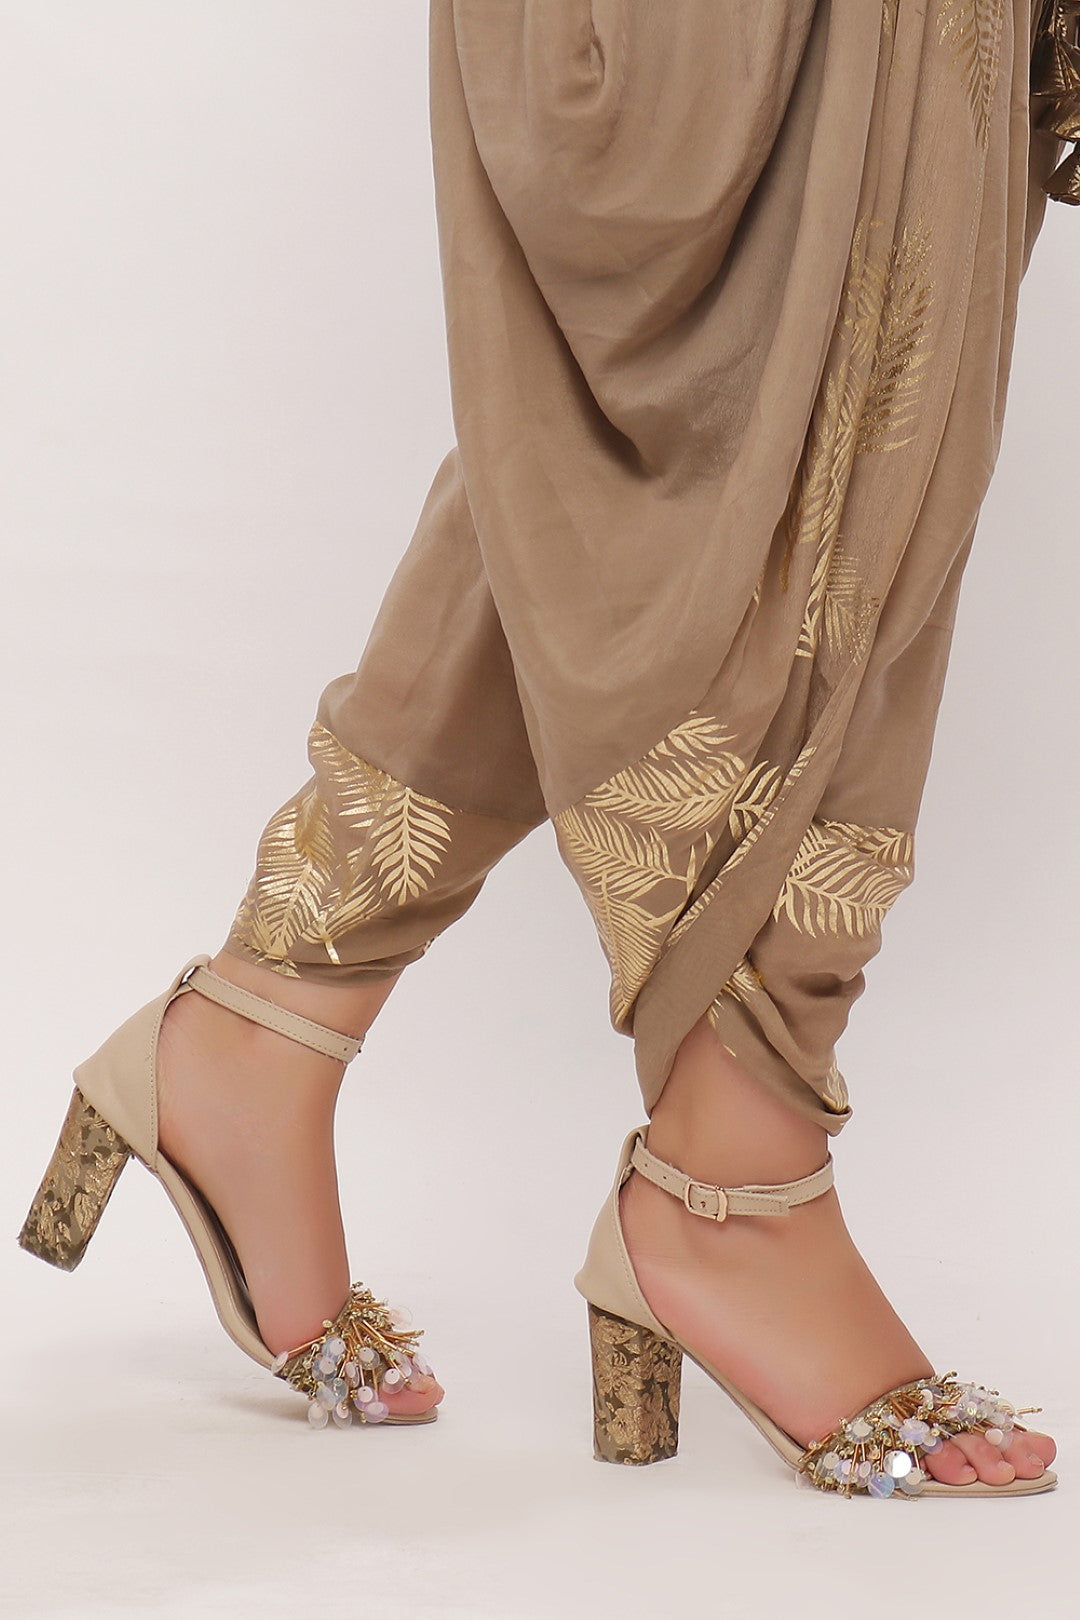 GOLD PRINTED EMBROIDERED  PEPLUM TOP WITH GOLD PRINTED  PANELLED COWL DHOTI